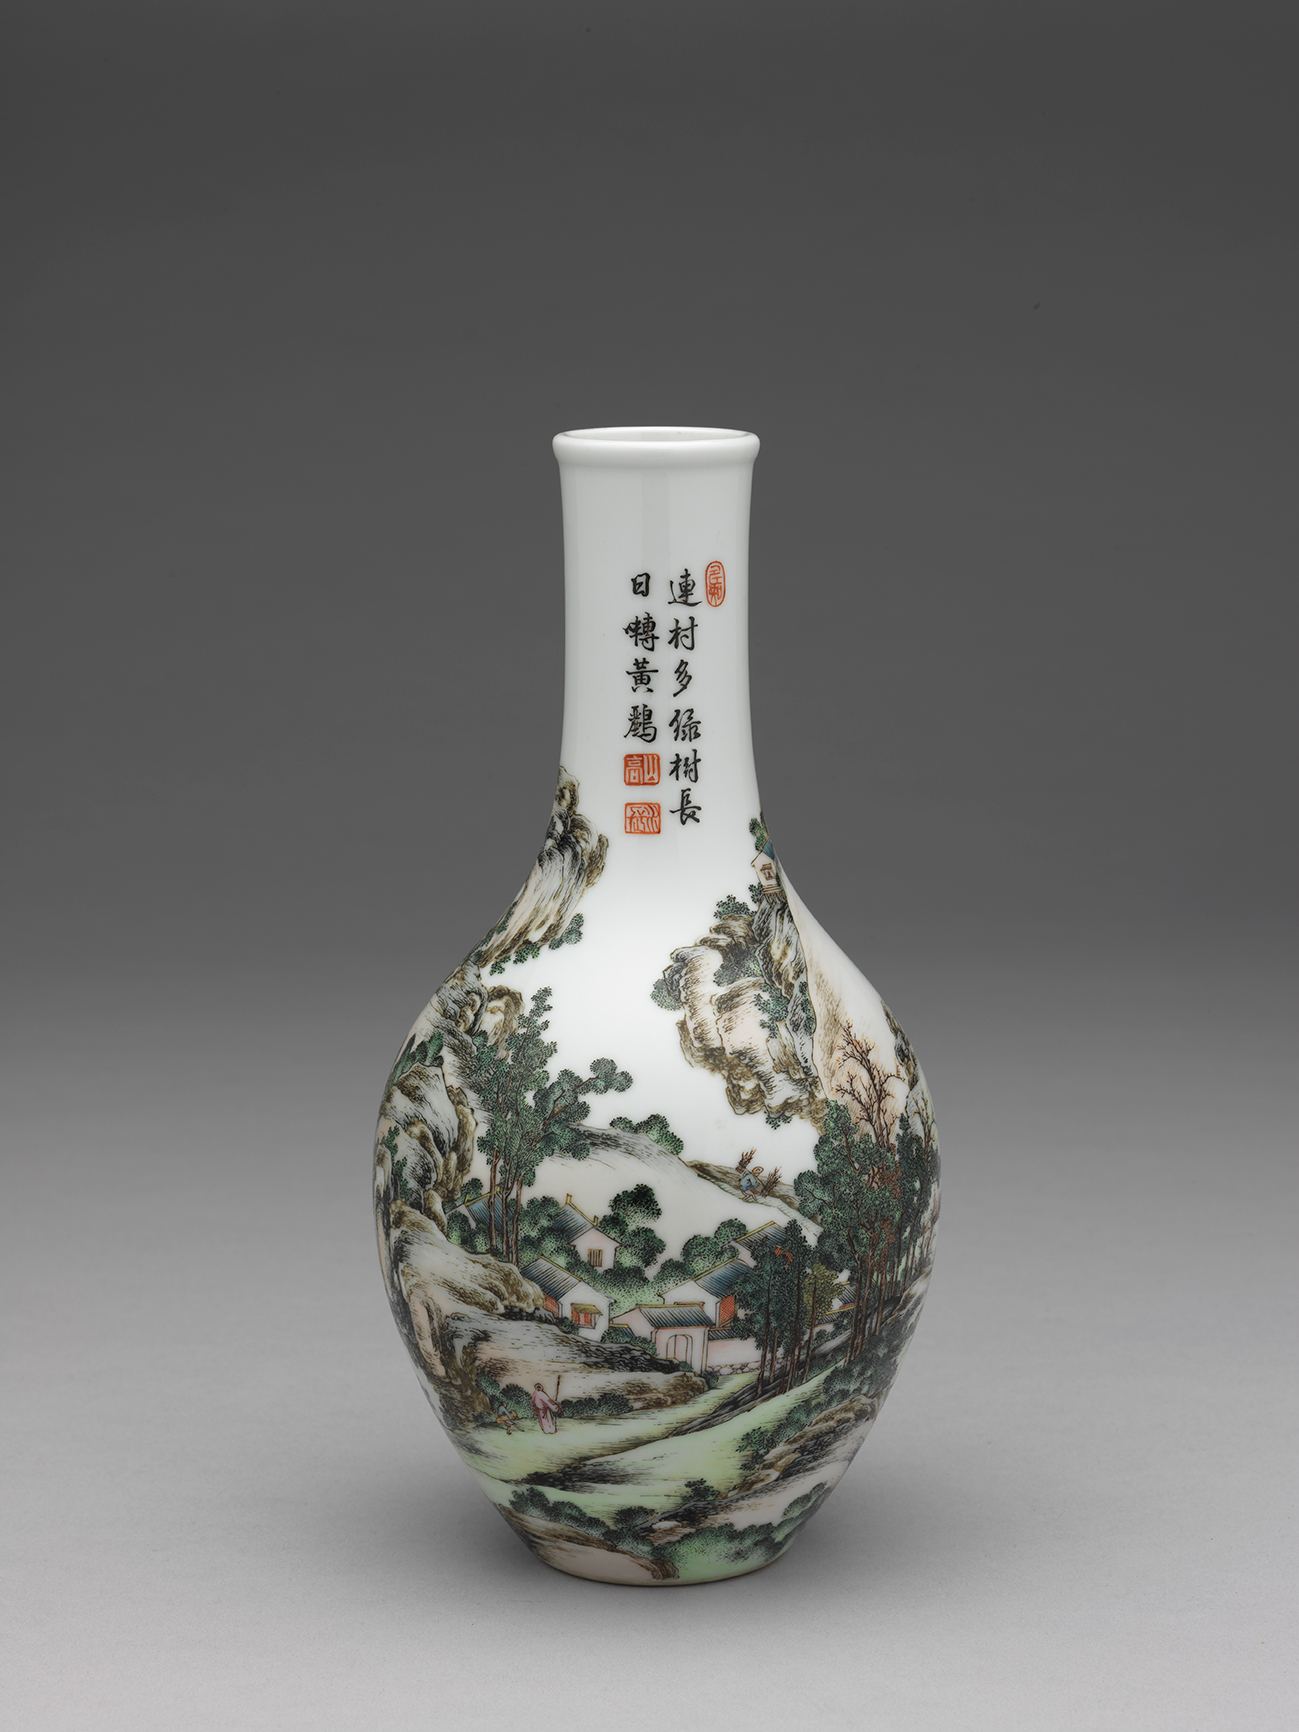 Gall-bladder-shaped vase with landscape in falangcai painted enamels